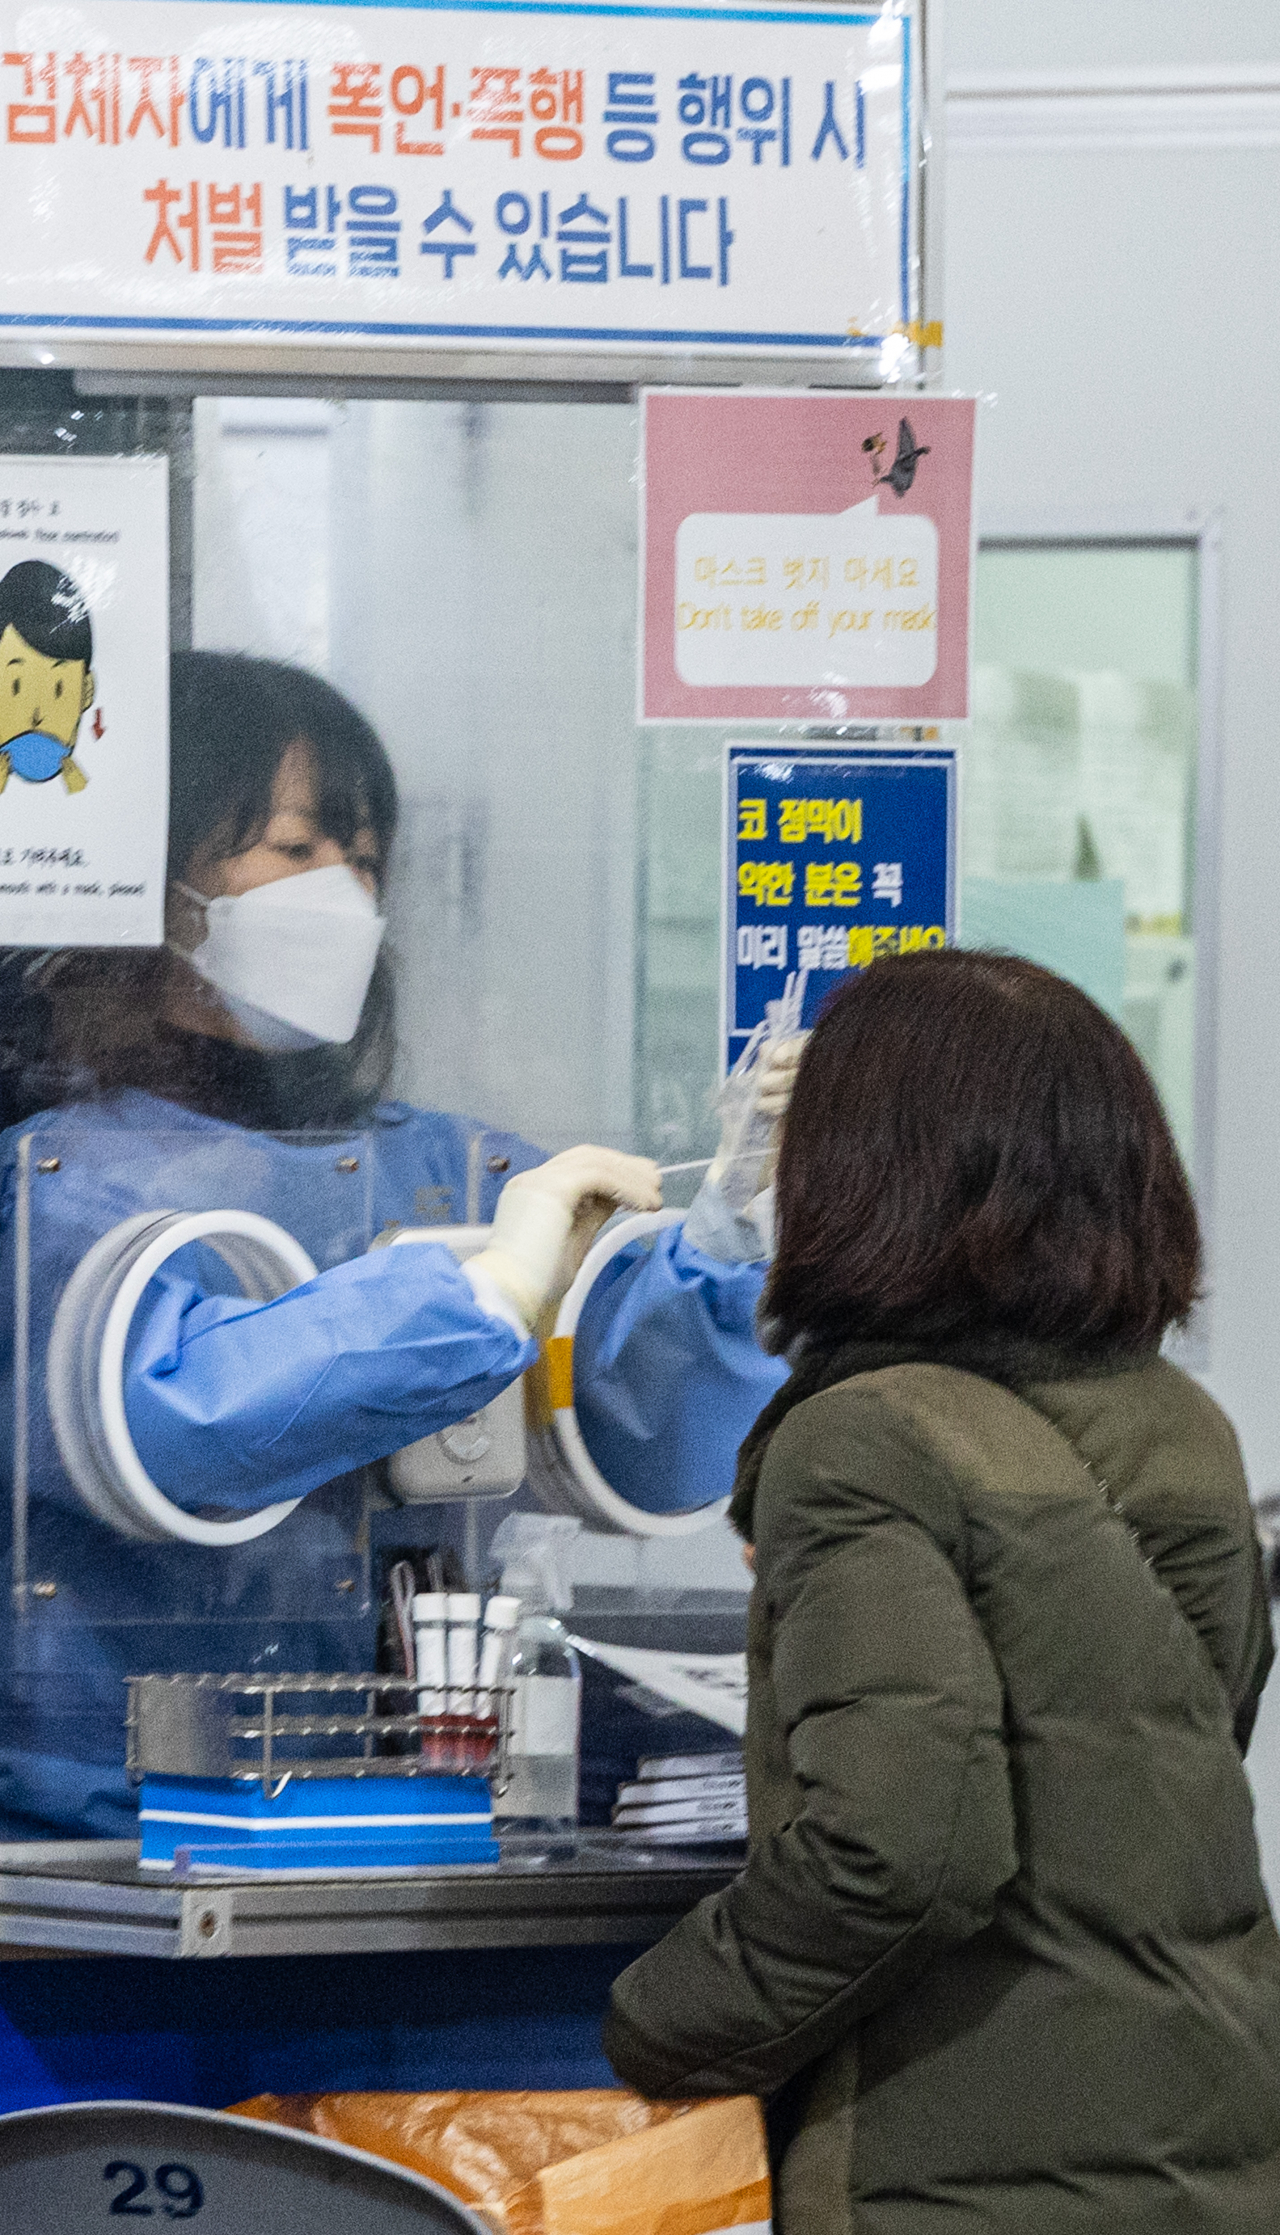 A medical worker conducts a coronavirus test on a woman at a public health facility in Seoul's Songpa Ward on Friday. South Korea's daily new COVID-19 cases came to 65,207, falling for the third consecutive day amid the government's efforts to contain the virus' wintertime resurgence. (Yonhap)